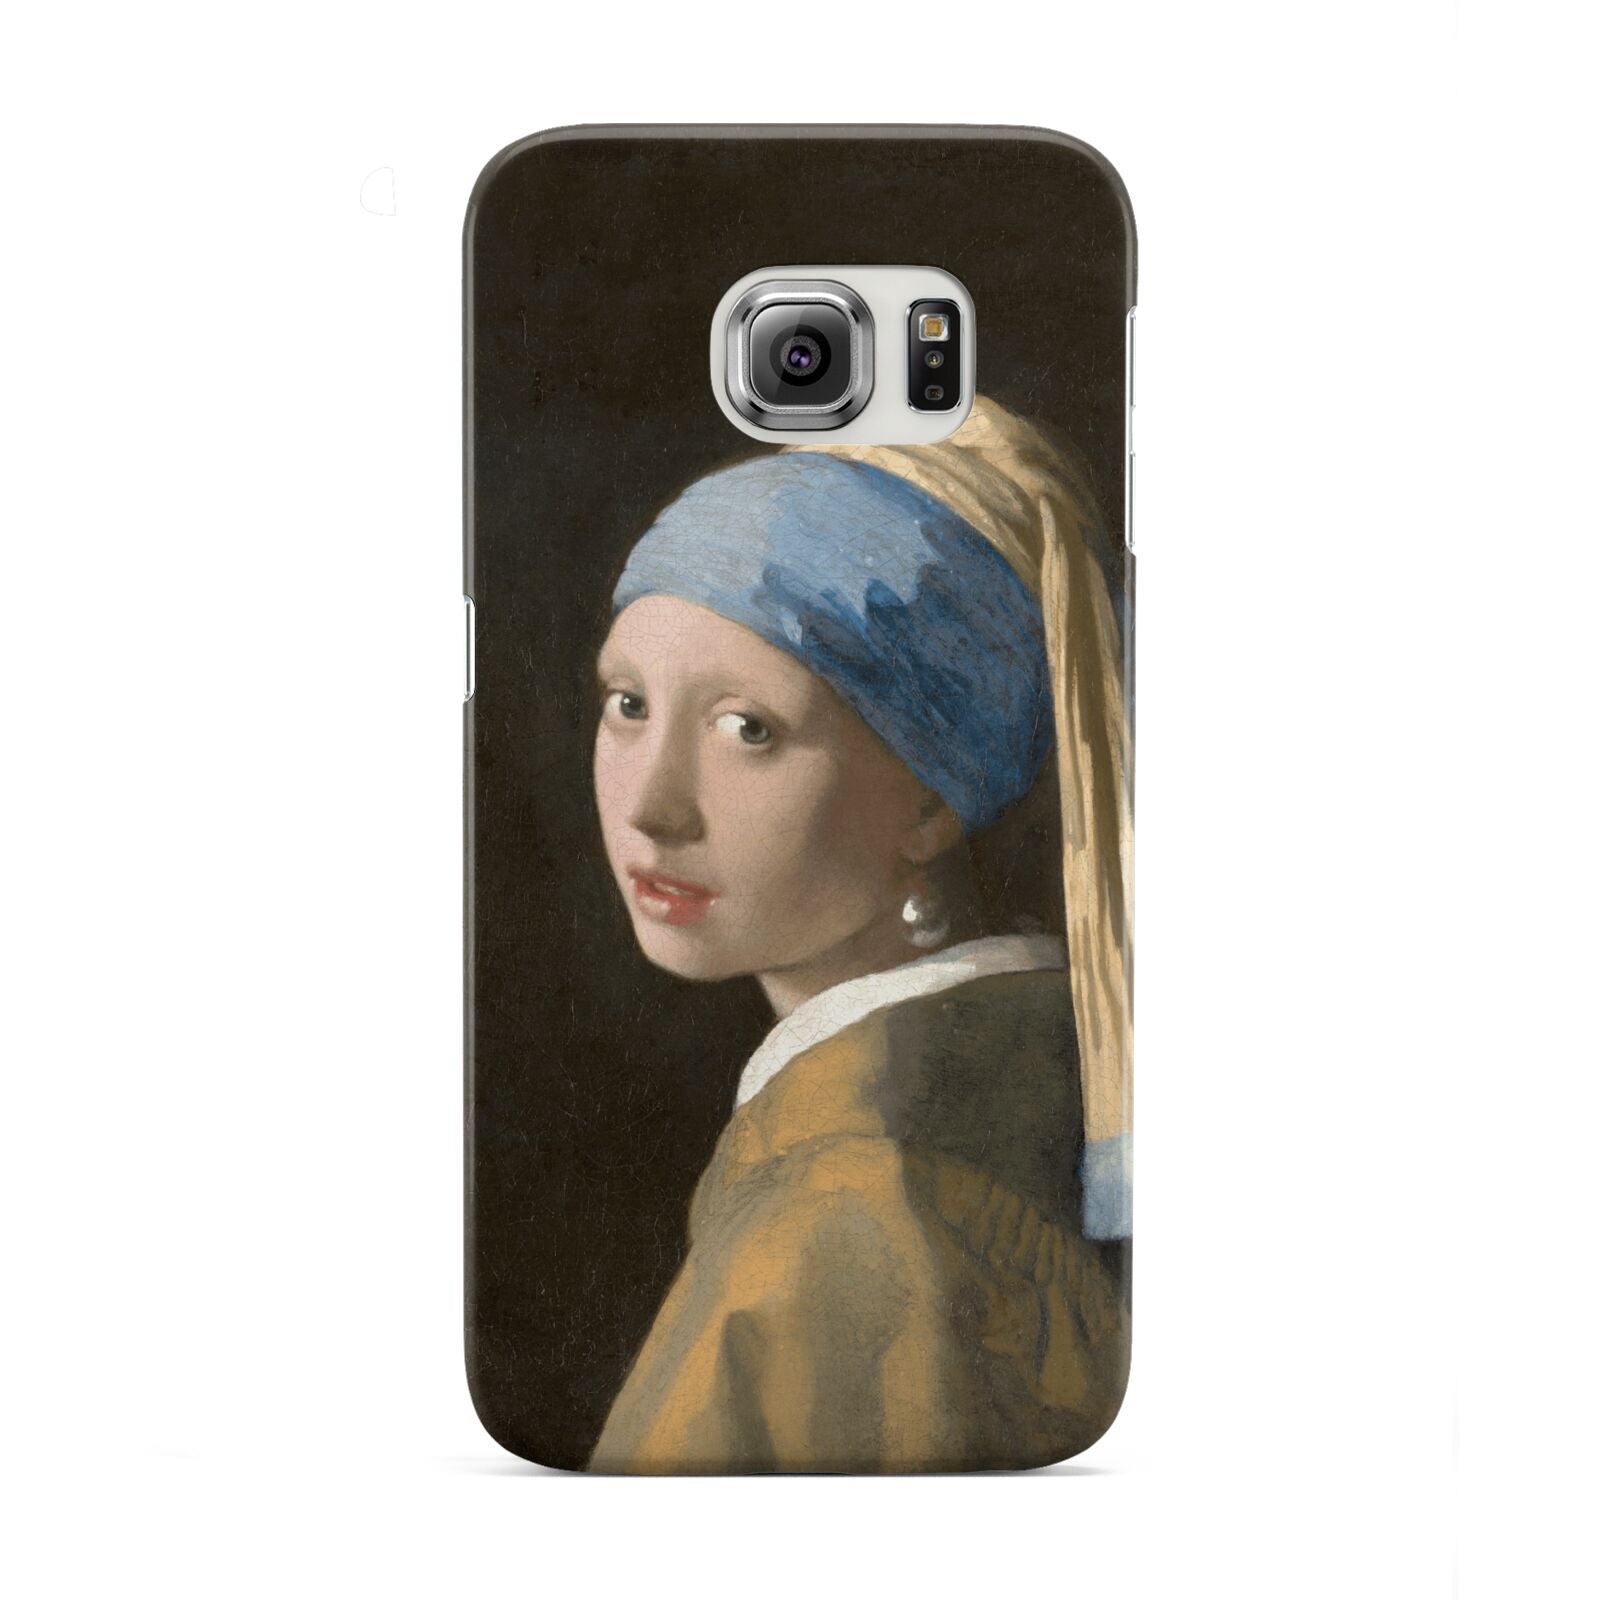 Girl With A Pearl Earring By Johannes Vermeer Samsung Galaxy S6 Edge Case